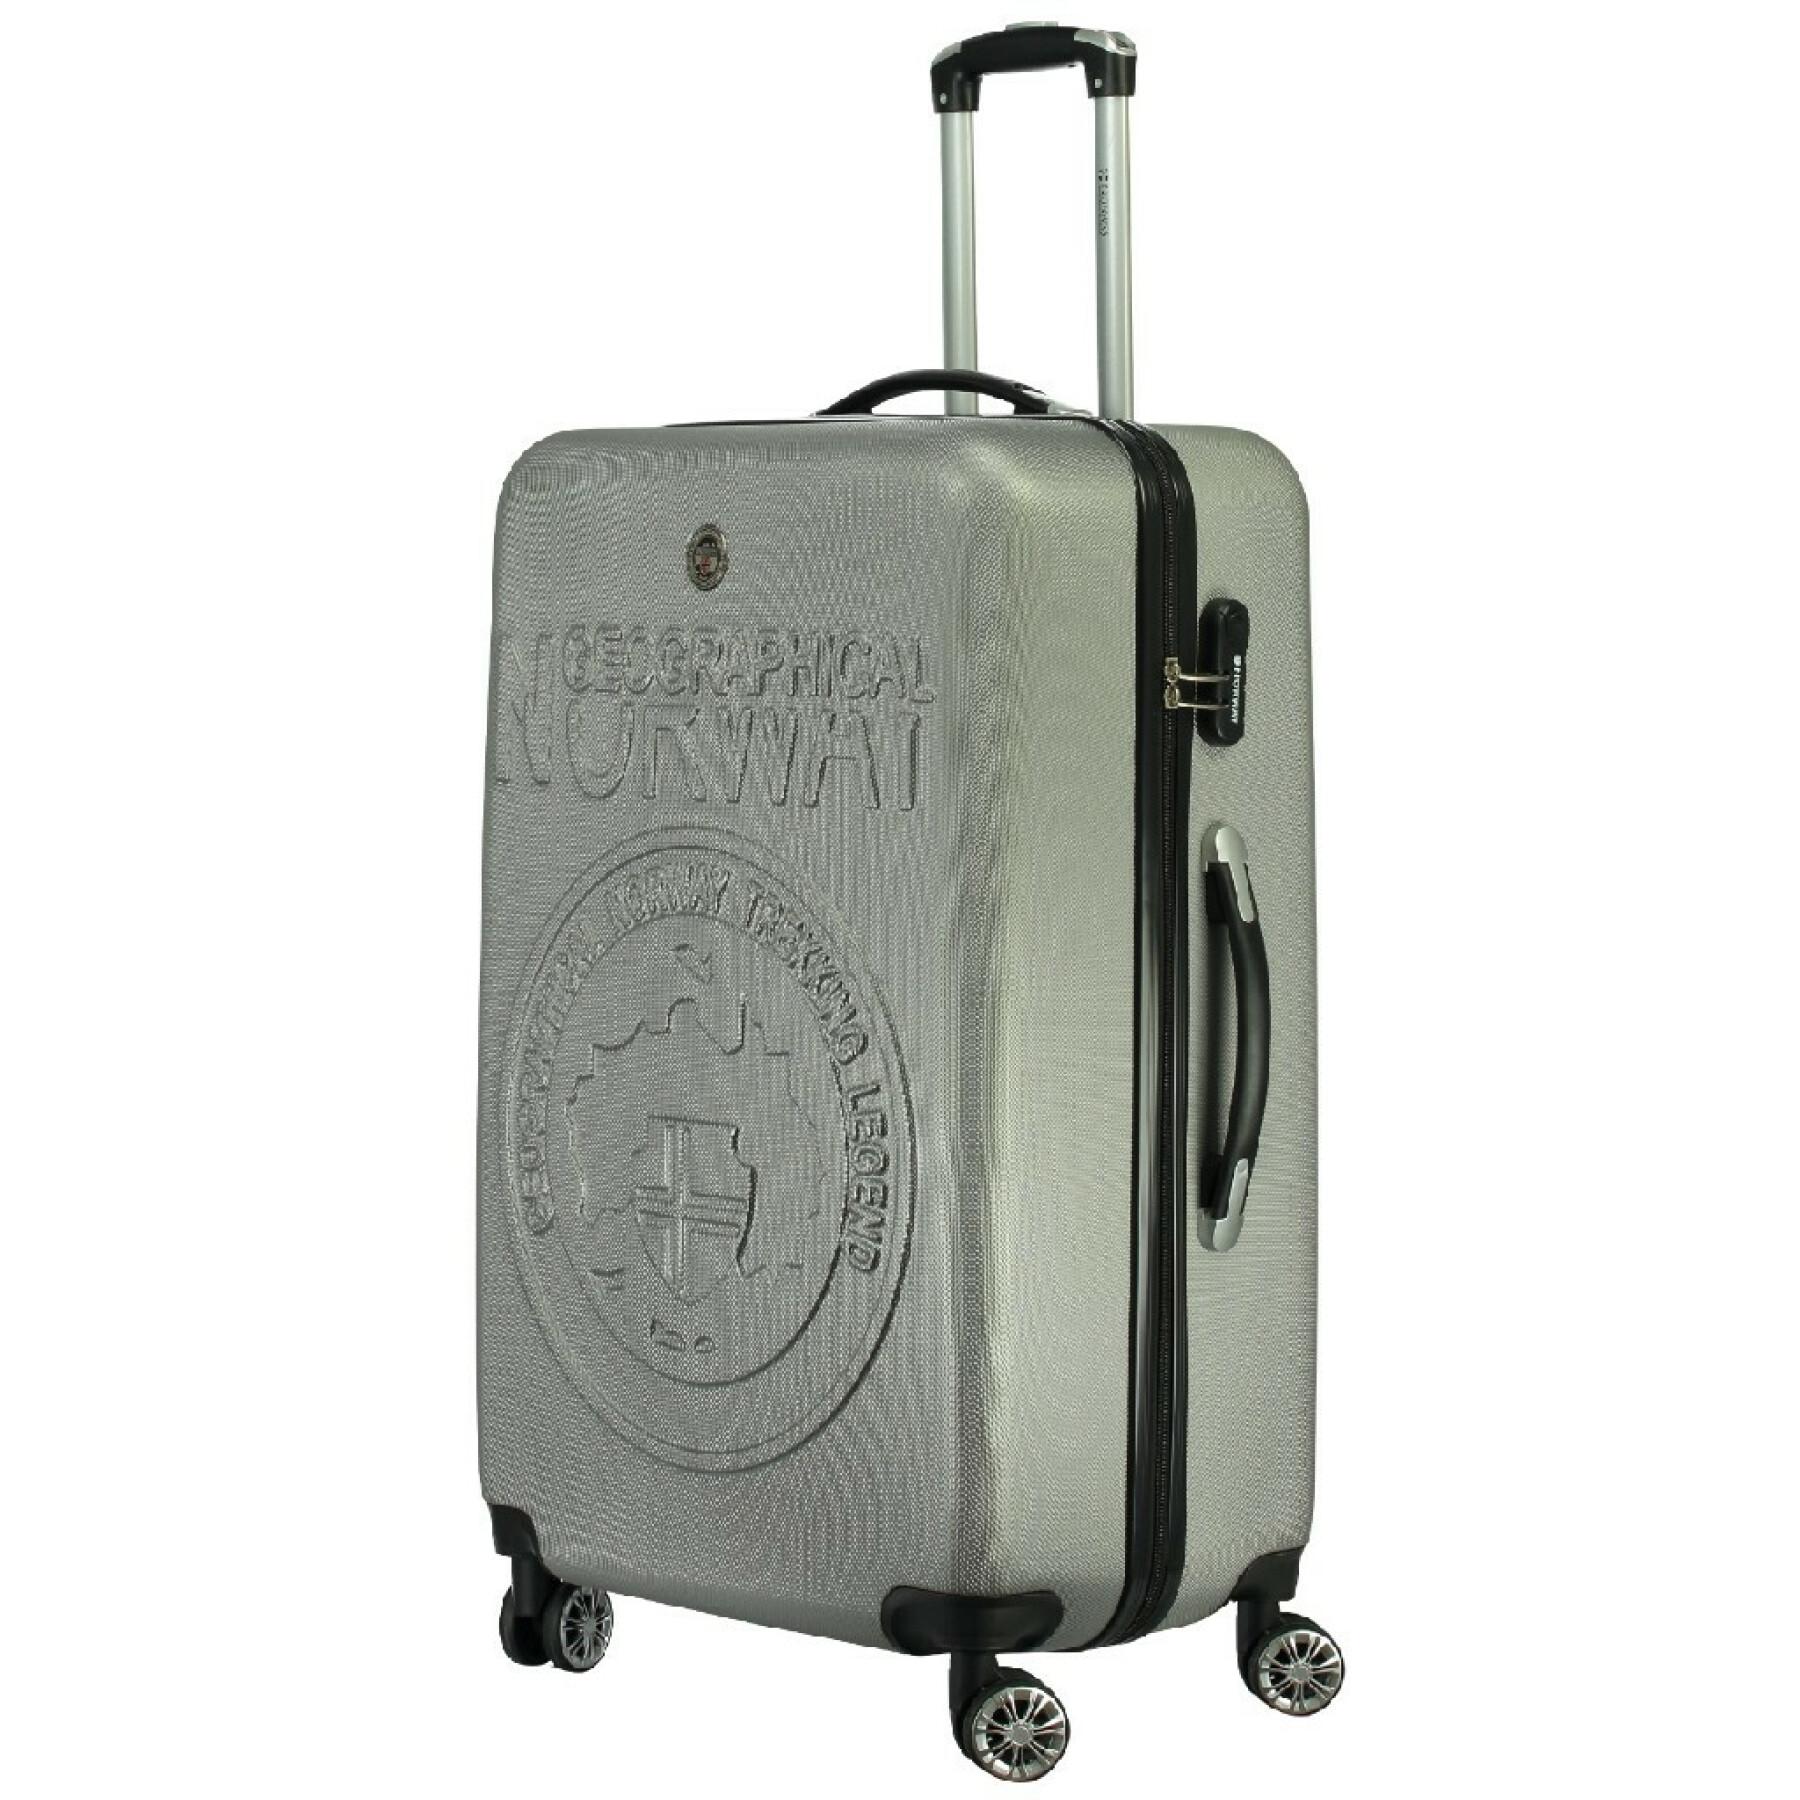 Suitcase Geographical Norway Stanislas Bs